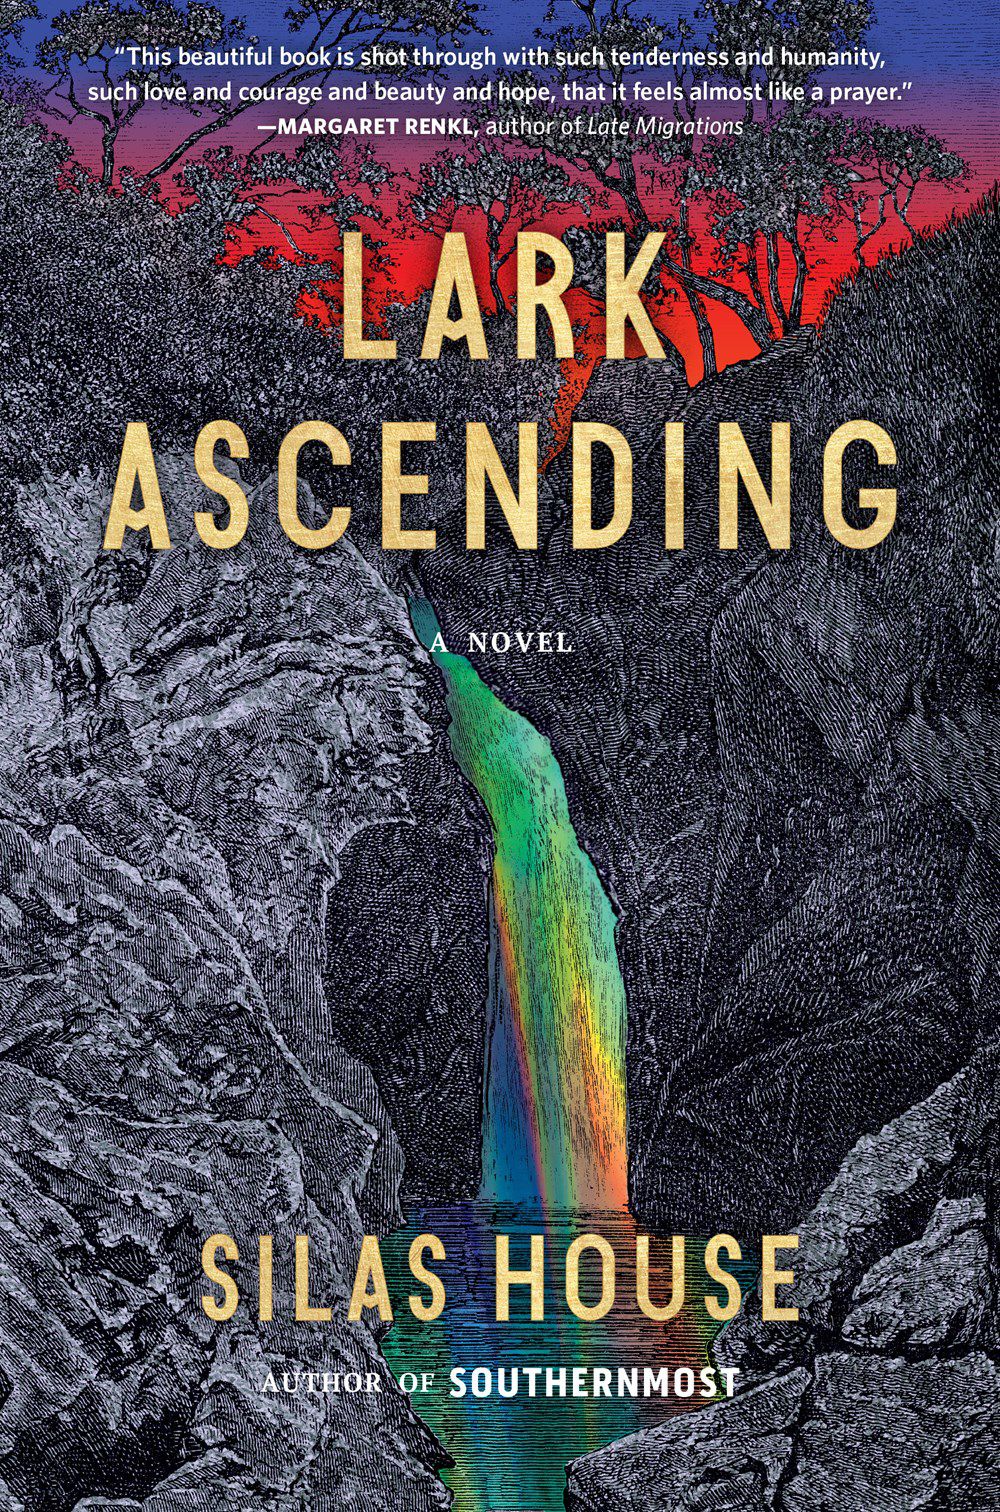 Cover image of Lark Ascending by Silas House, with a rainbow colored waterfall